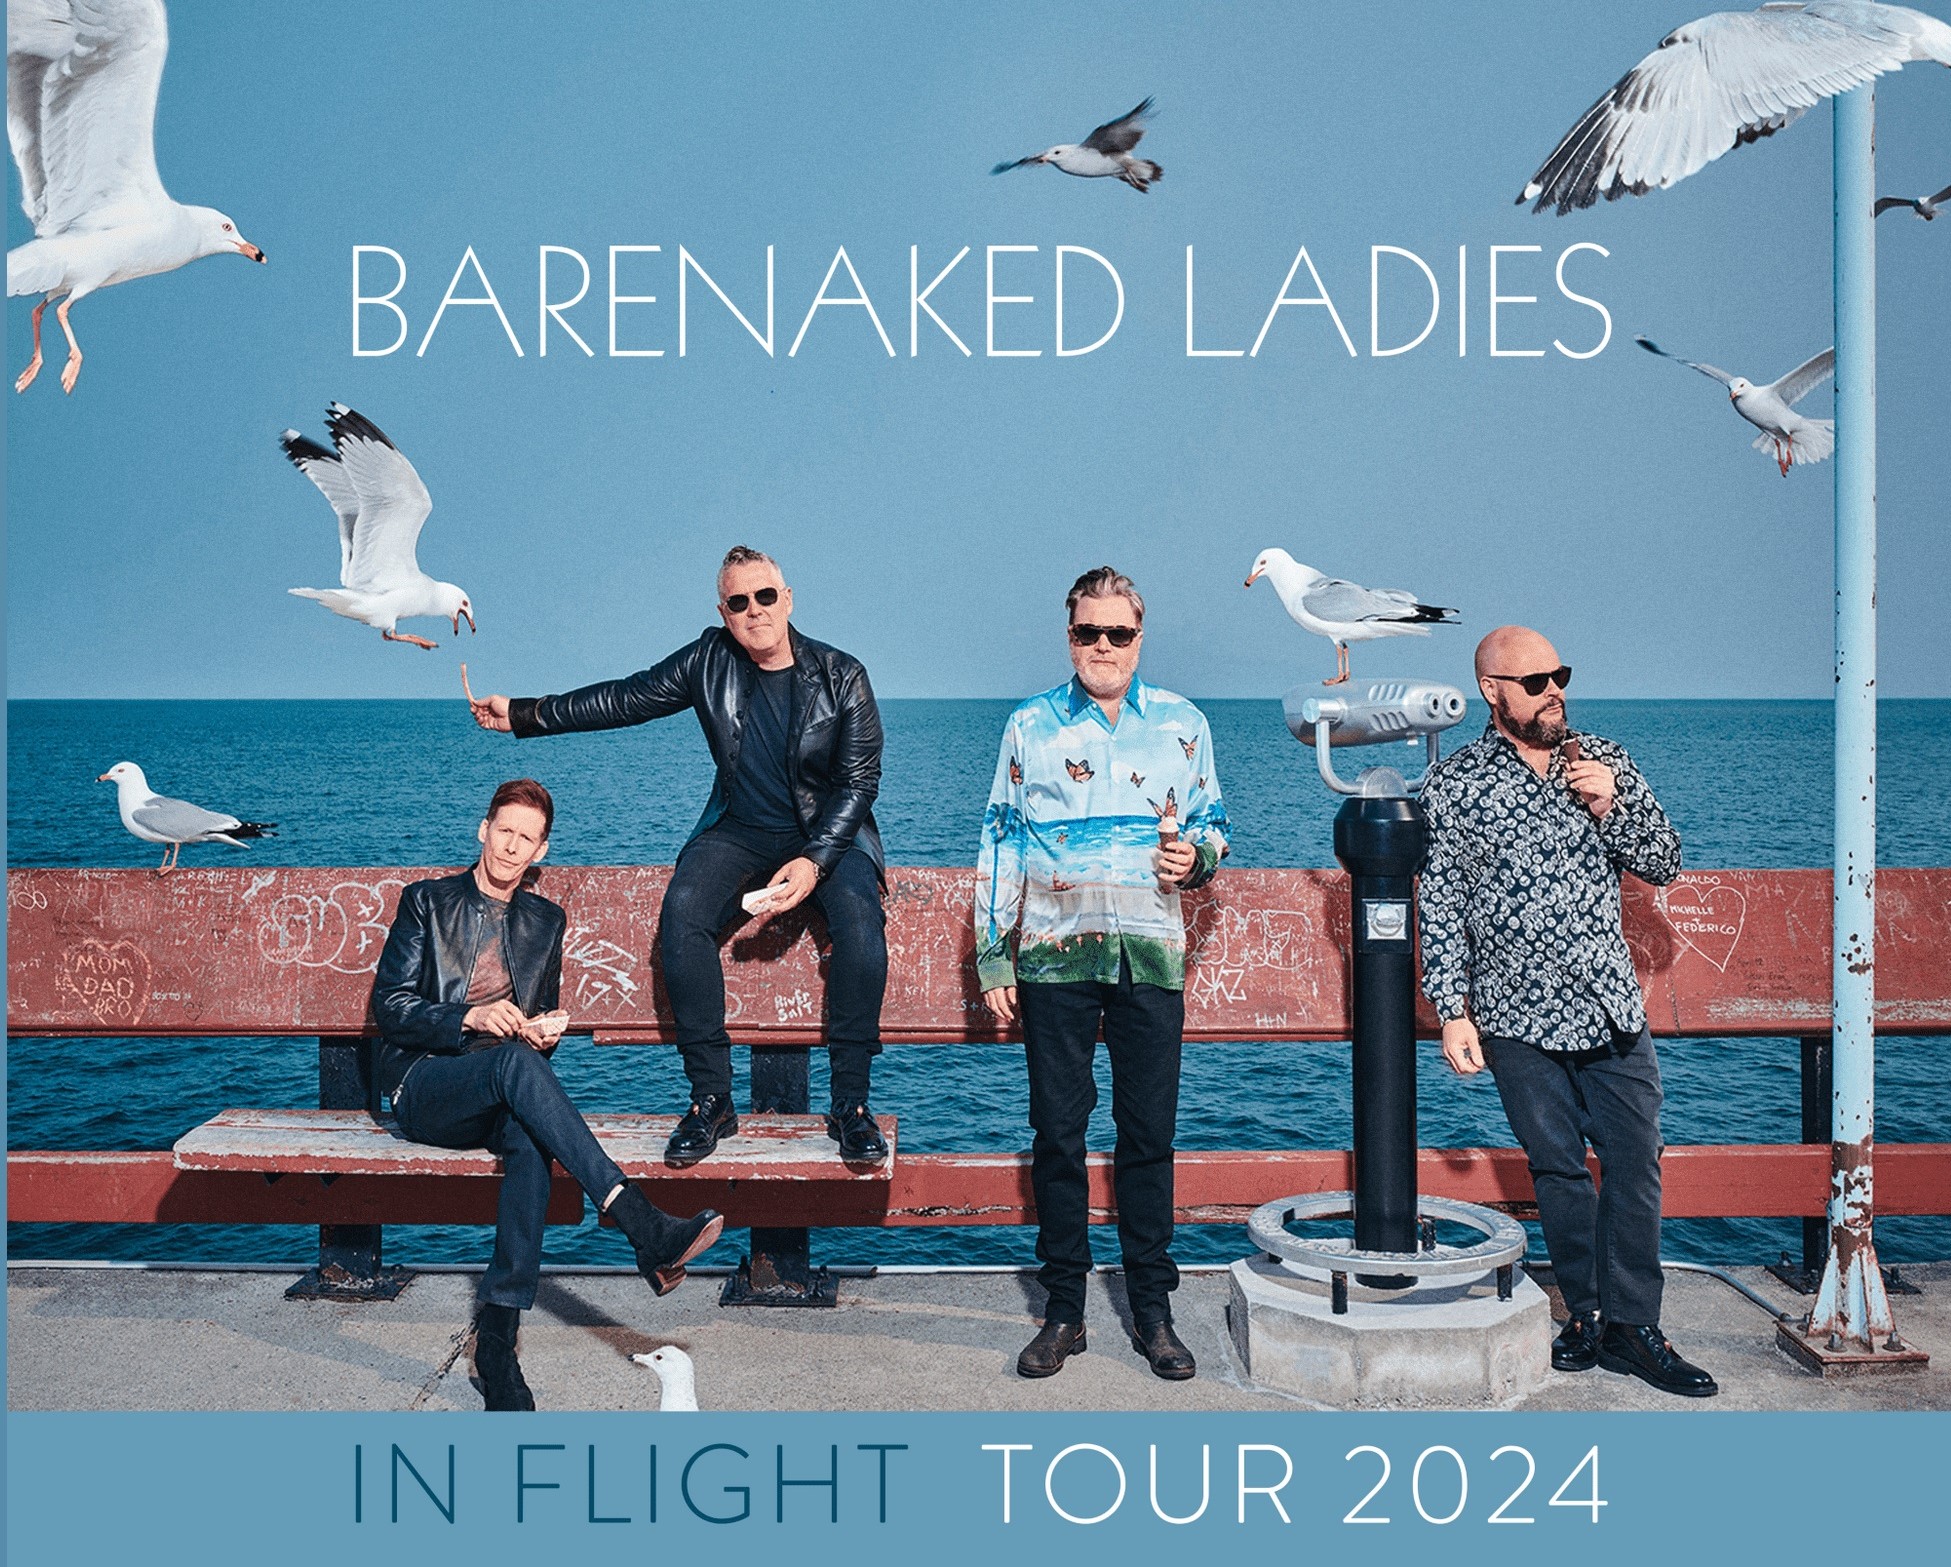 Barenaked Ladies with Toad the Wet Sprocket on tour this fall